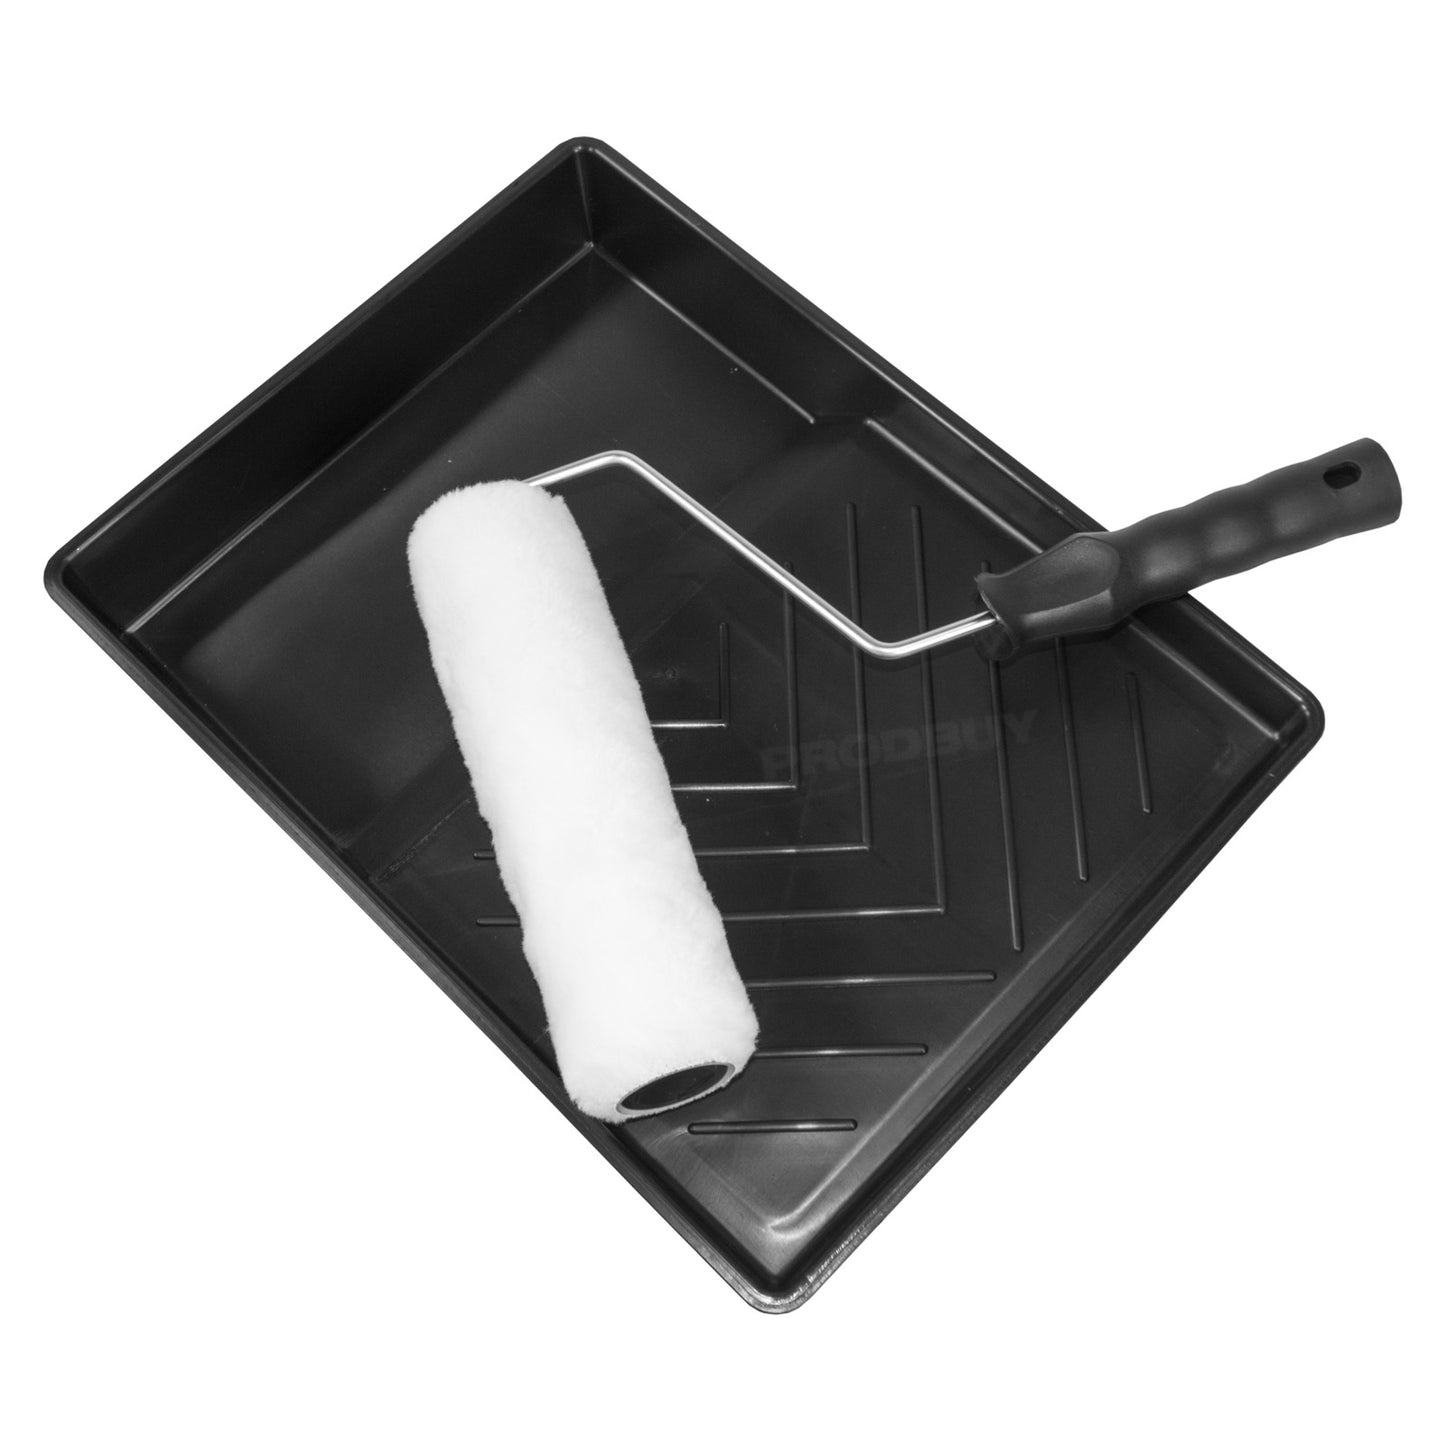 Stanley 9" Paint Roller & Tray Set